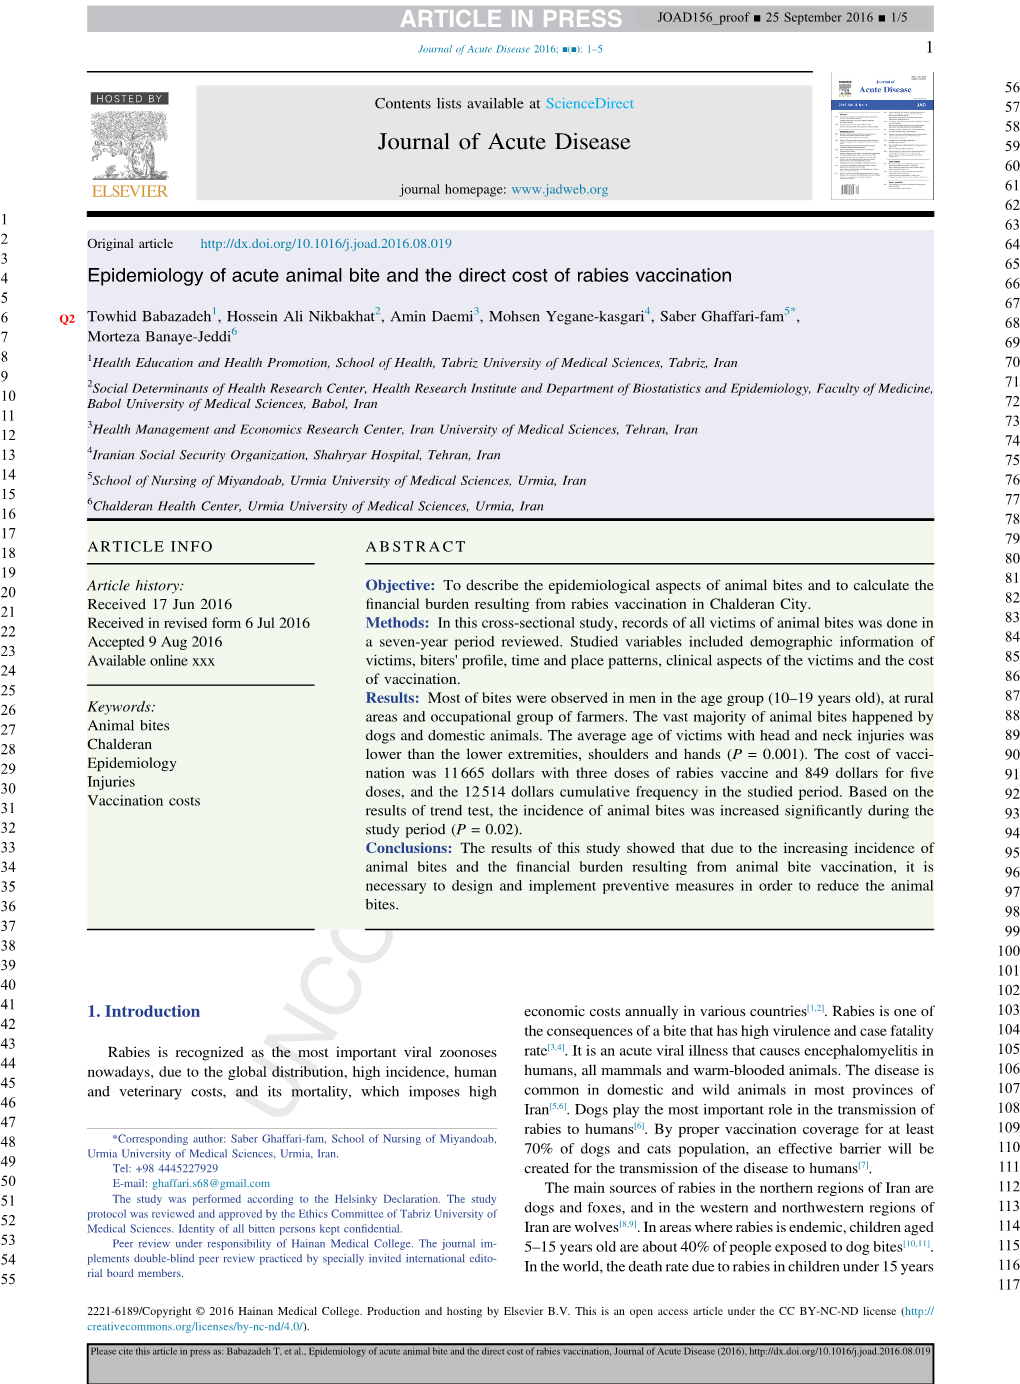 Epidemiology of Acute Animal Bite and the Direct Cost of Rabies Vaccination